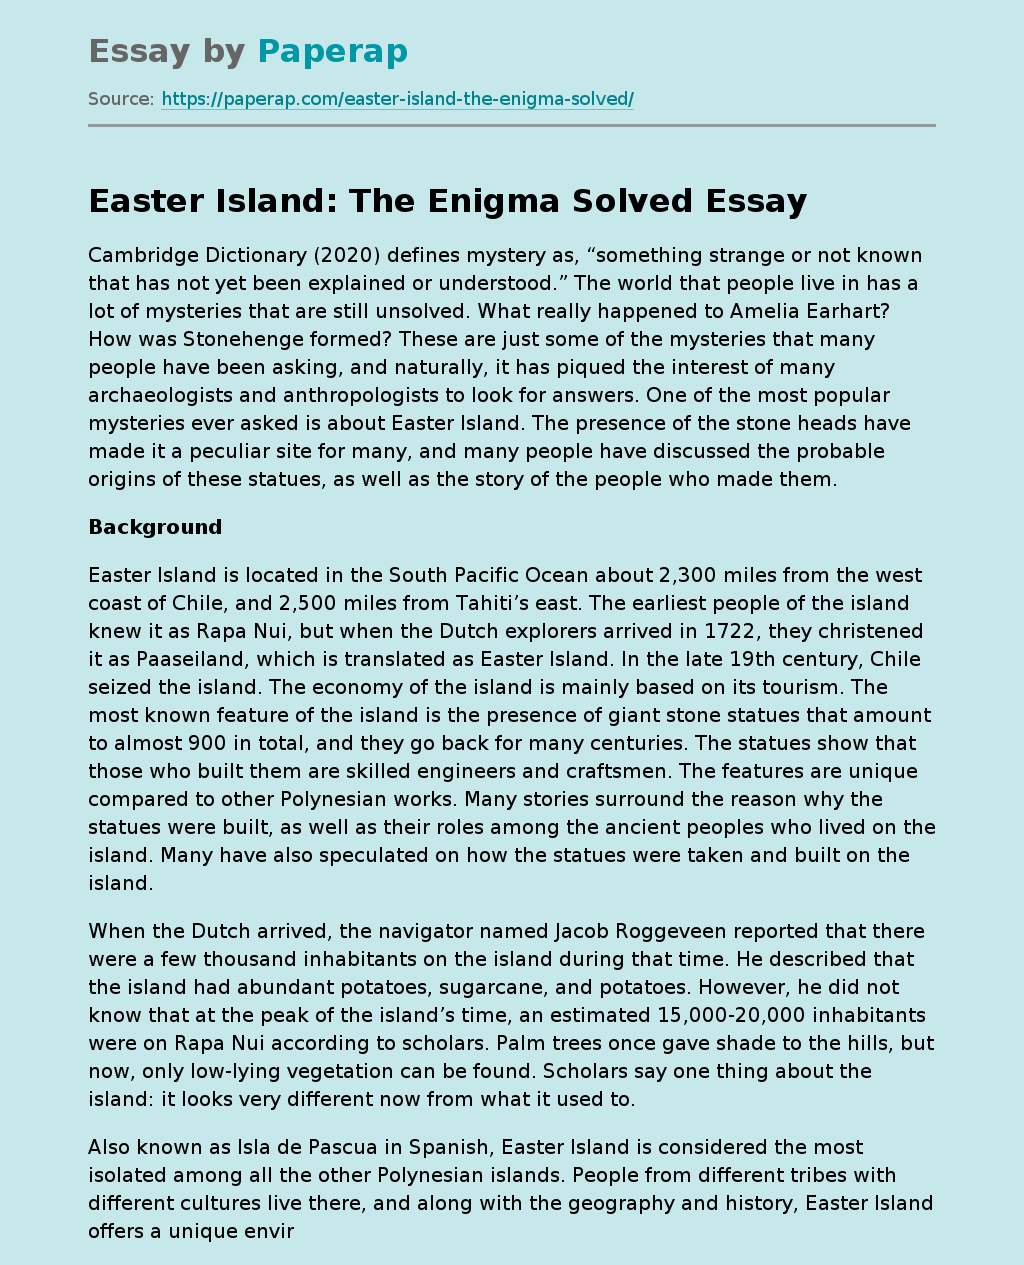 Easter Island: The Enigma Solved